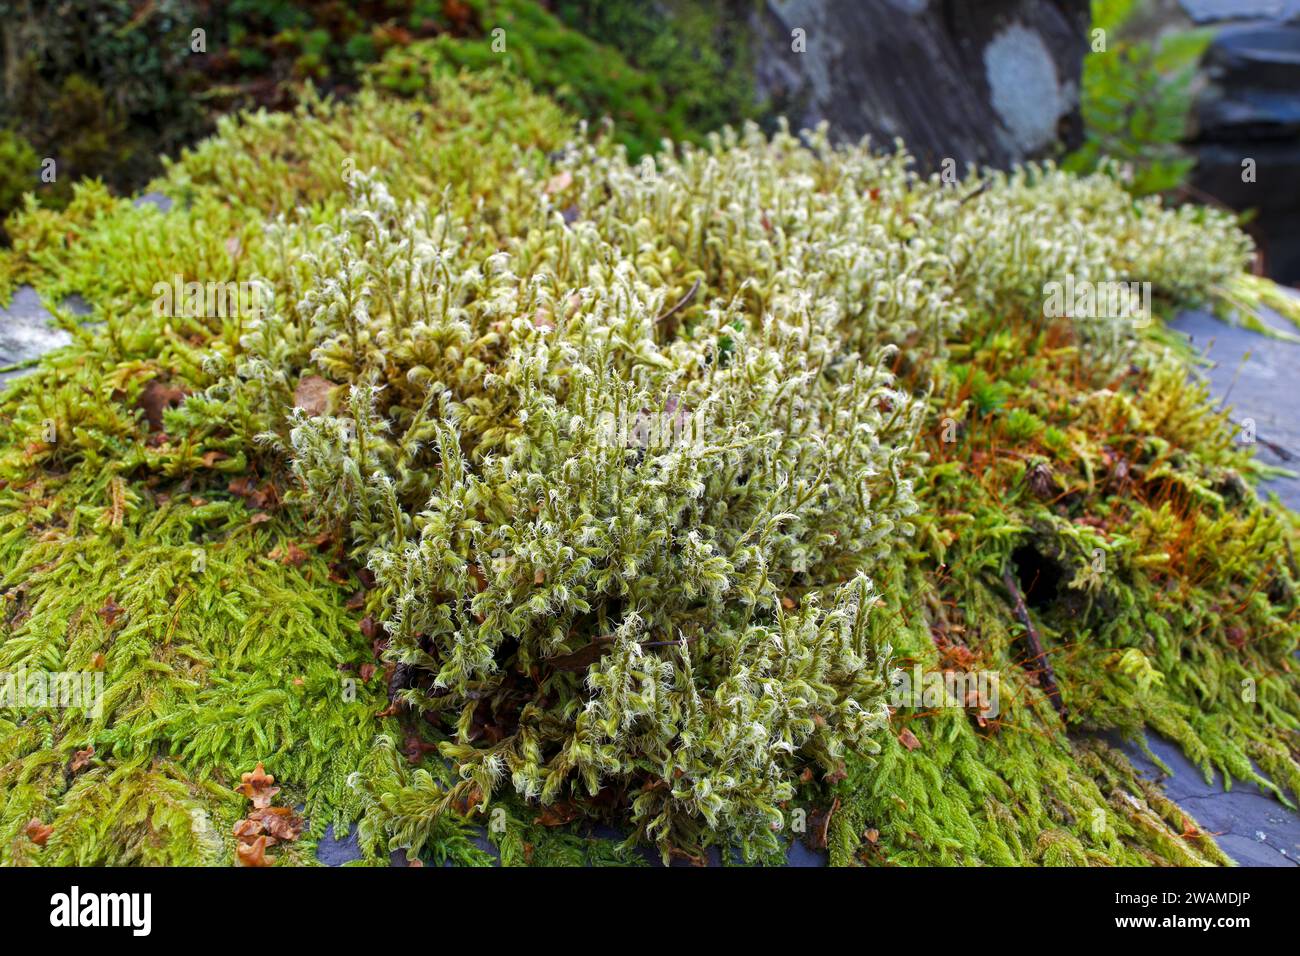 The moss Racomitrium lanuginosum with Hypnum cupressiforme in the background. It is found in montane habitats and arctic tundra. Stock Photo